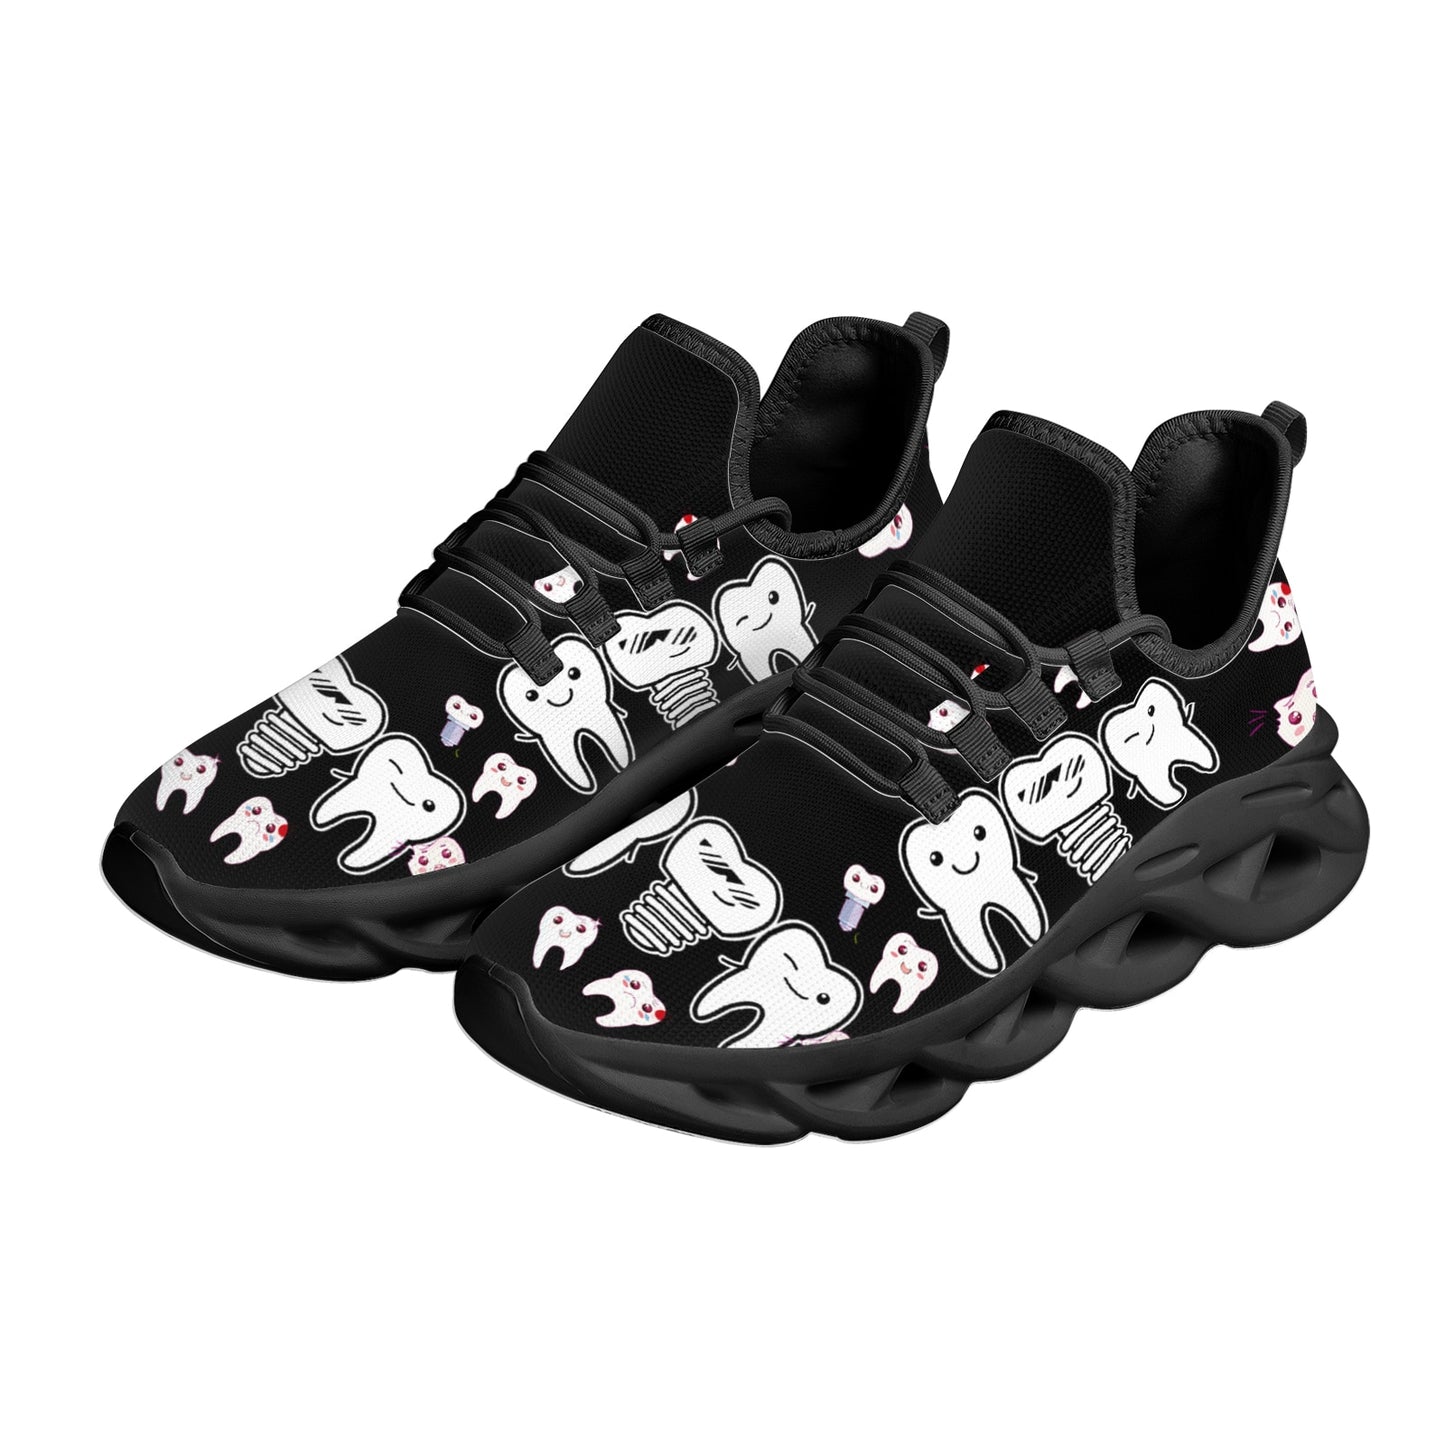 INSTANTARTS Cute Cartoon Teeth Platform Sneakers Comfortable Breathable Summer Knitted Blade Shoes Black Dental Shoes Flats